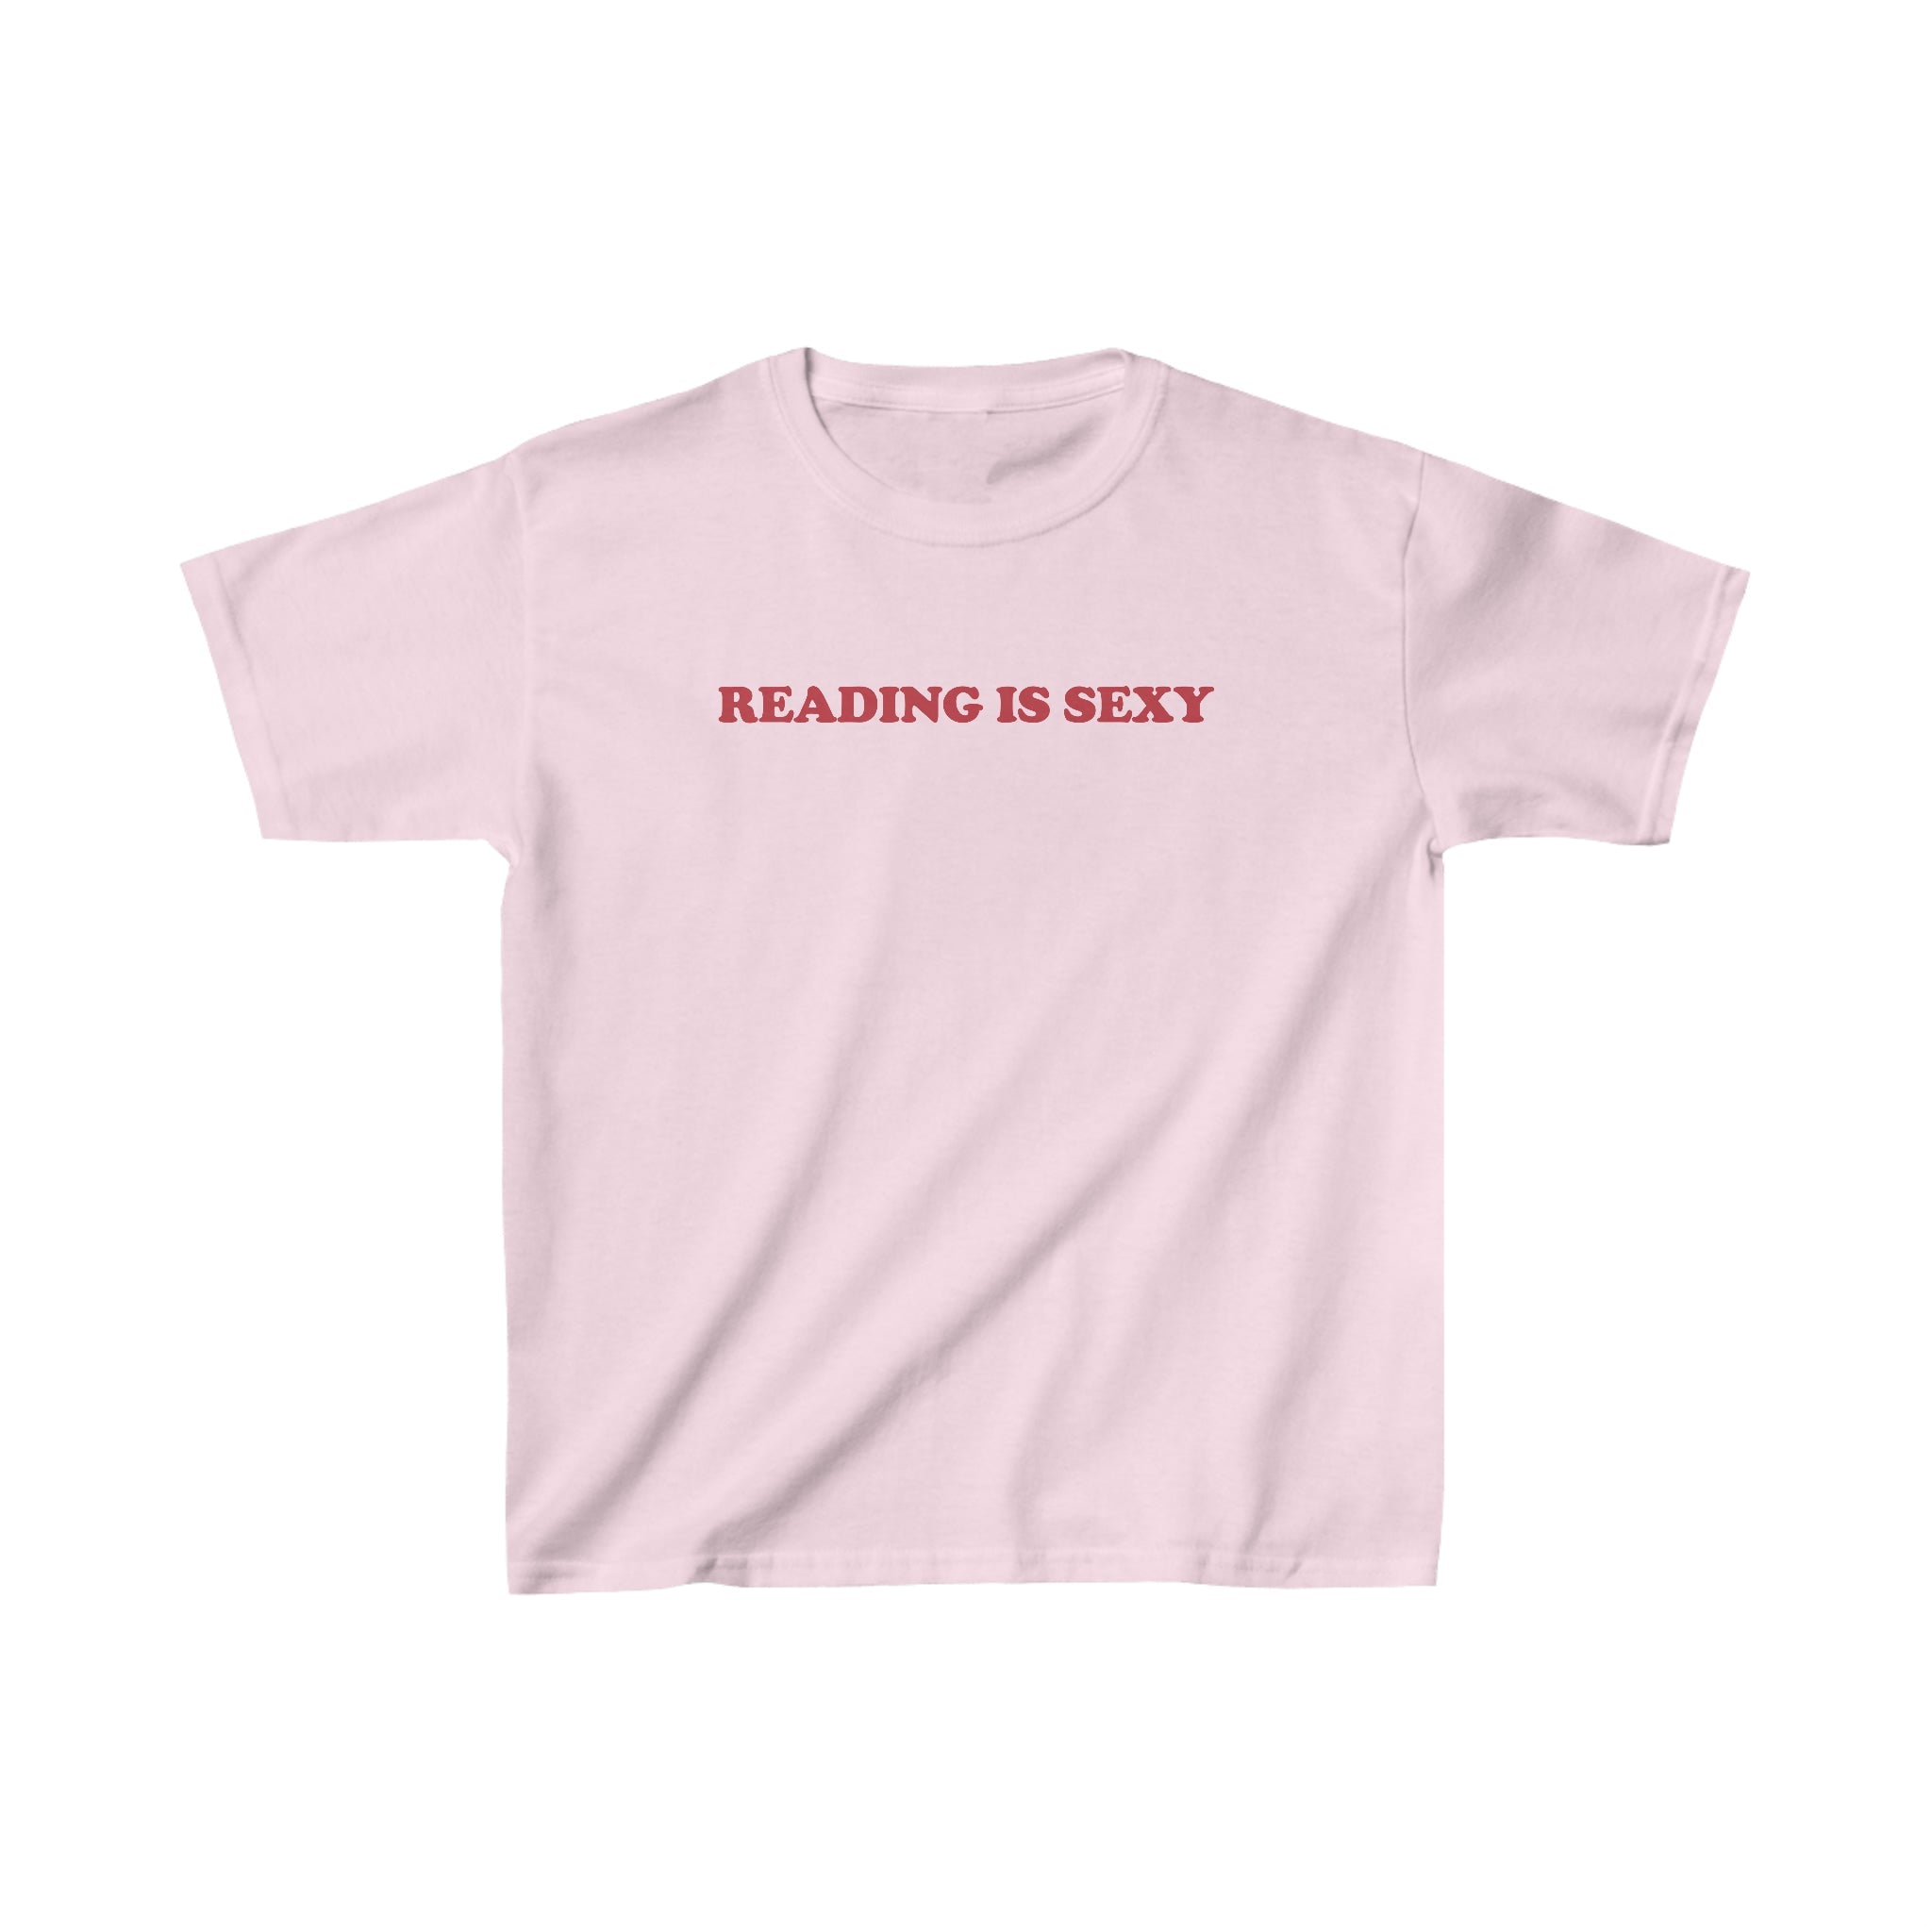 'Reading is Sexy' baby tee - In Print We Trust